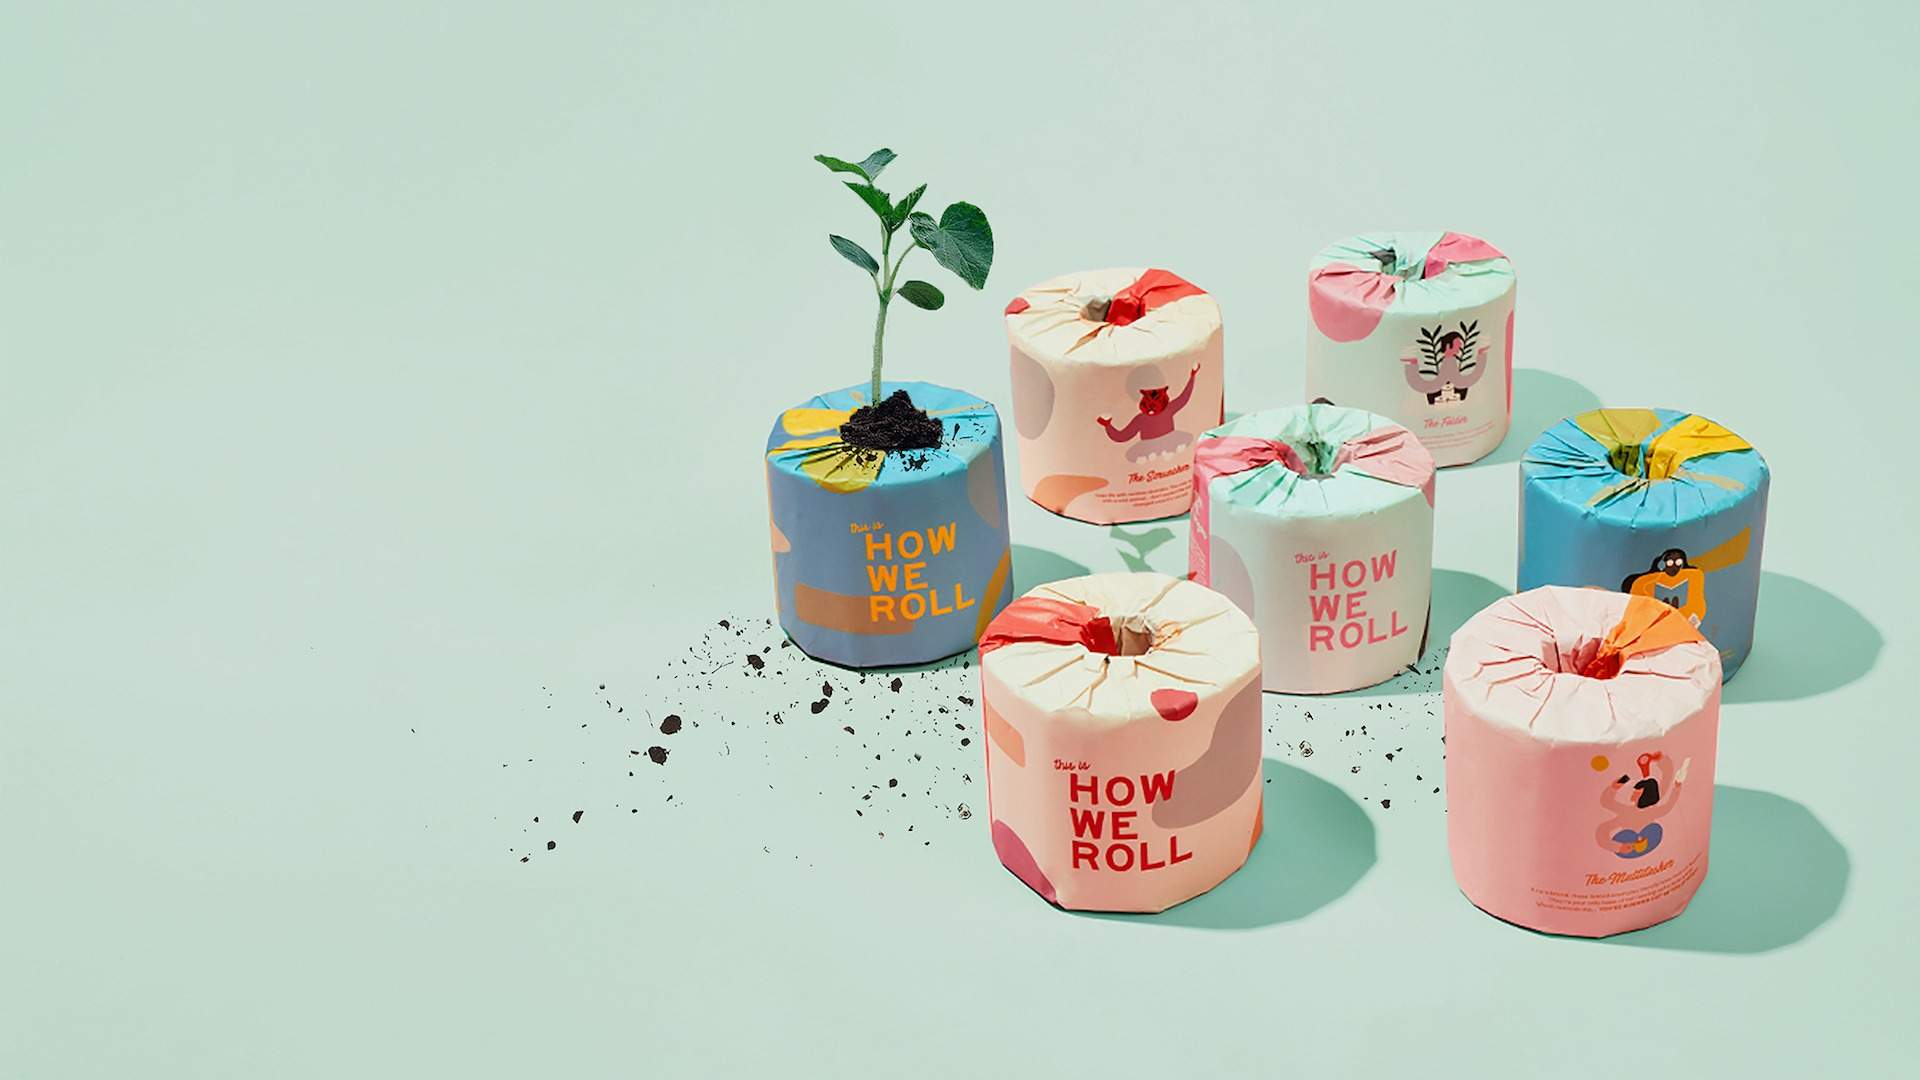 How We Roll Is the New Toilet Paper Brand Planting Trees in Bushfire-Affected Areas